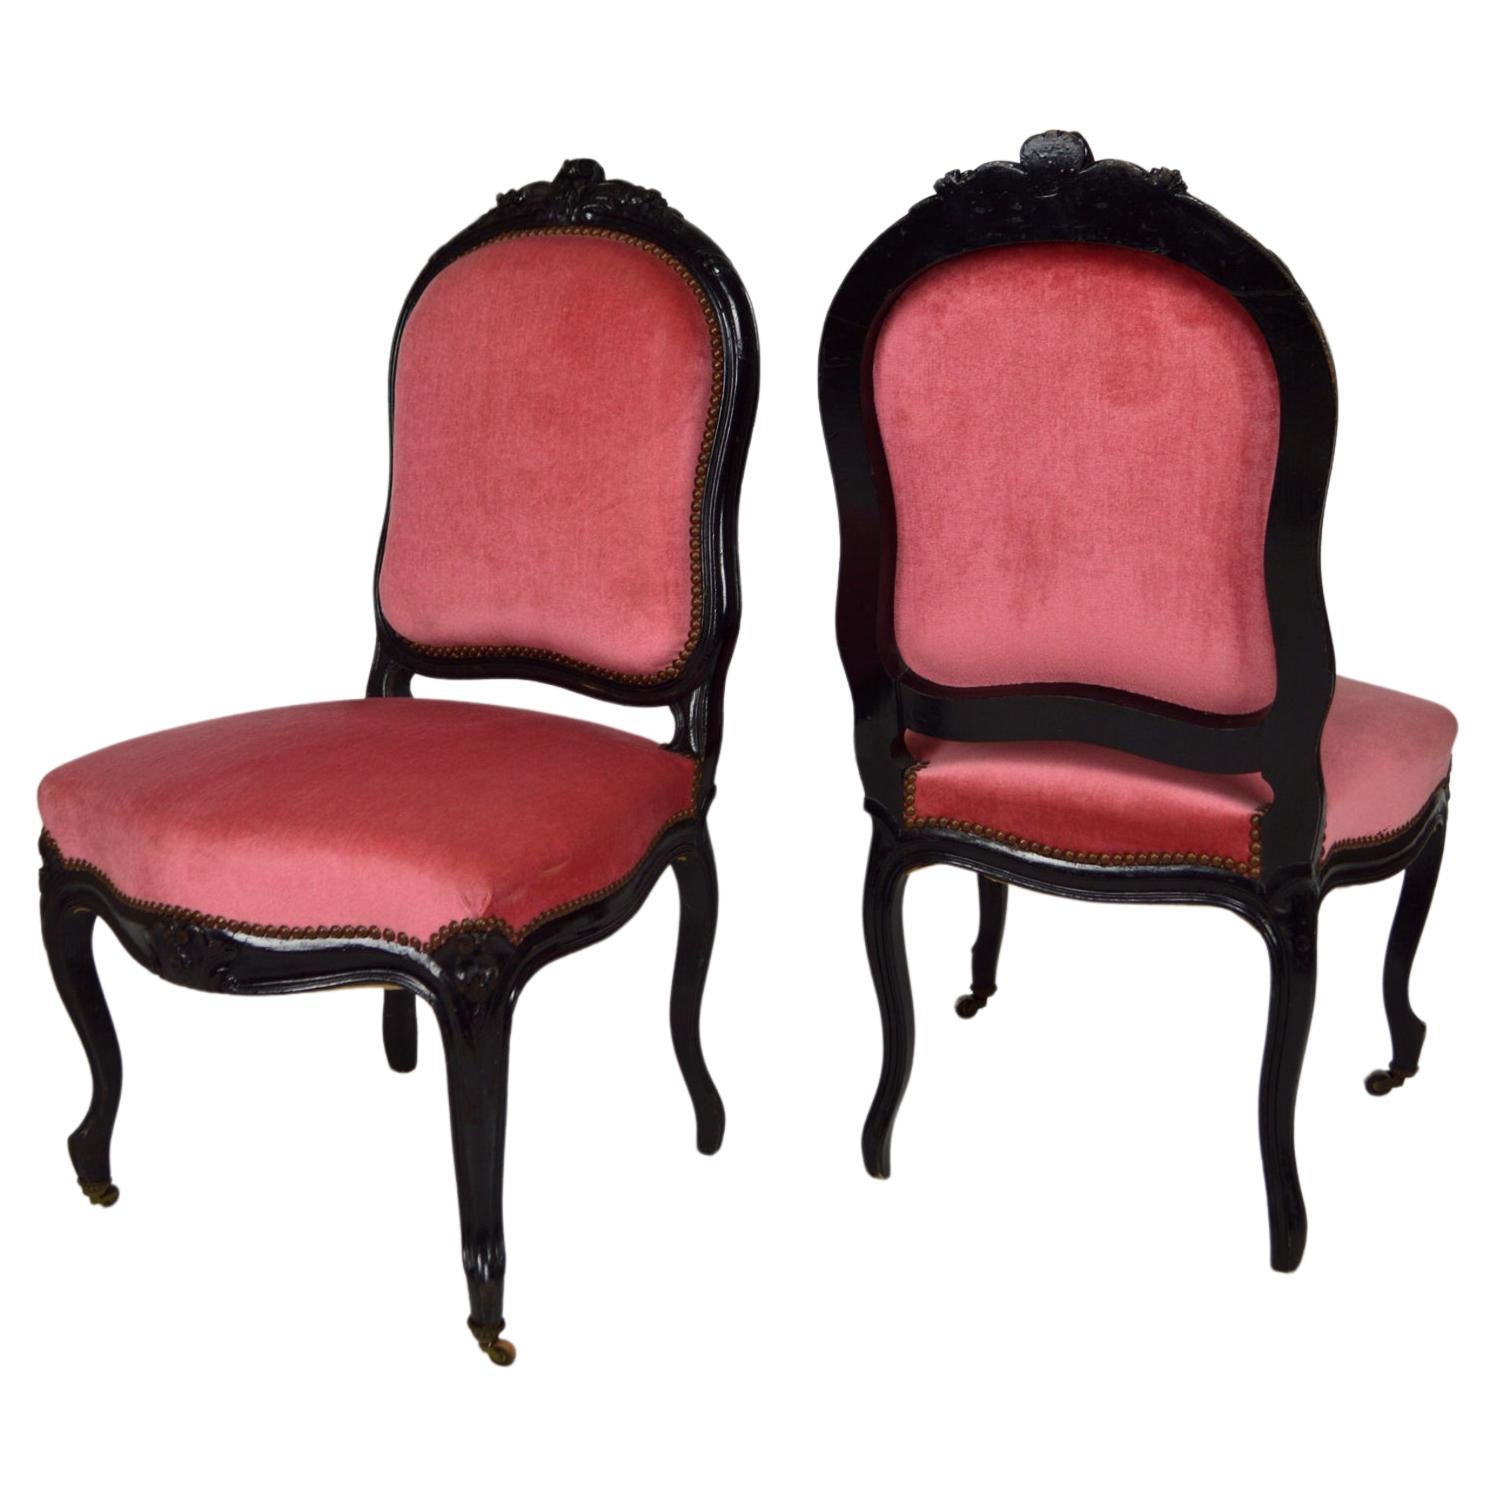 Napoleon III Chairs in Ebonized Wood and Pink Velvet, France, circa 1870 For Sale